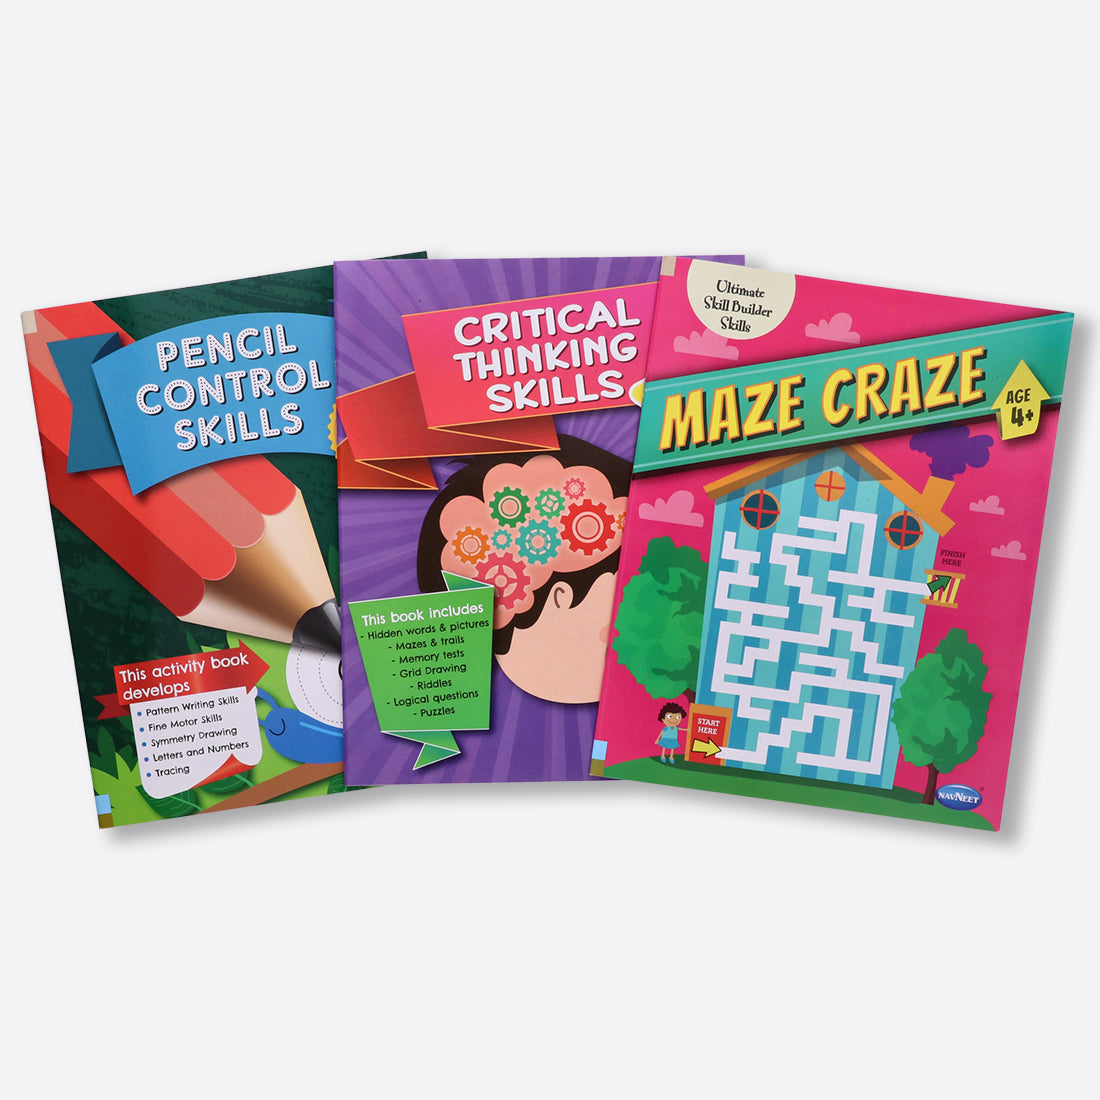 Navneet Pencil Control, Maze & Critical Thinking Activity Books for 4 Year & Above Kids- 3 Books- More than 90 activities- Practice Pattern Writing- Fun Skill Based books